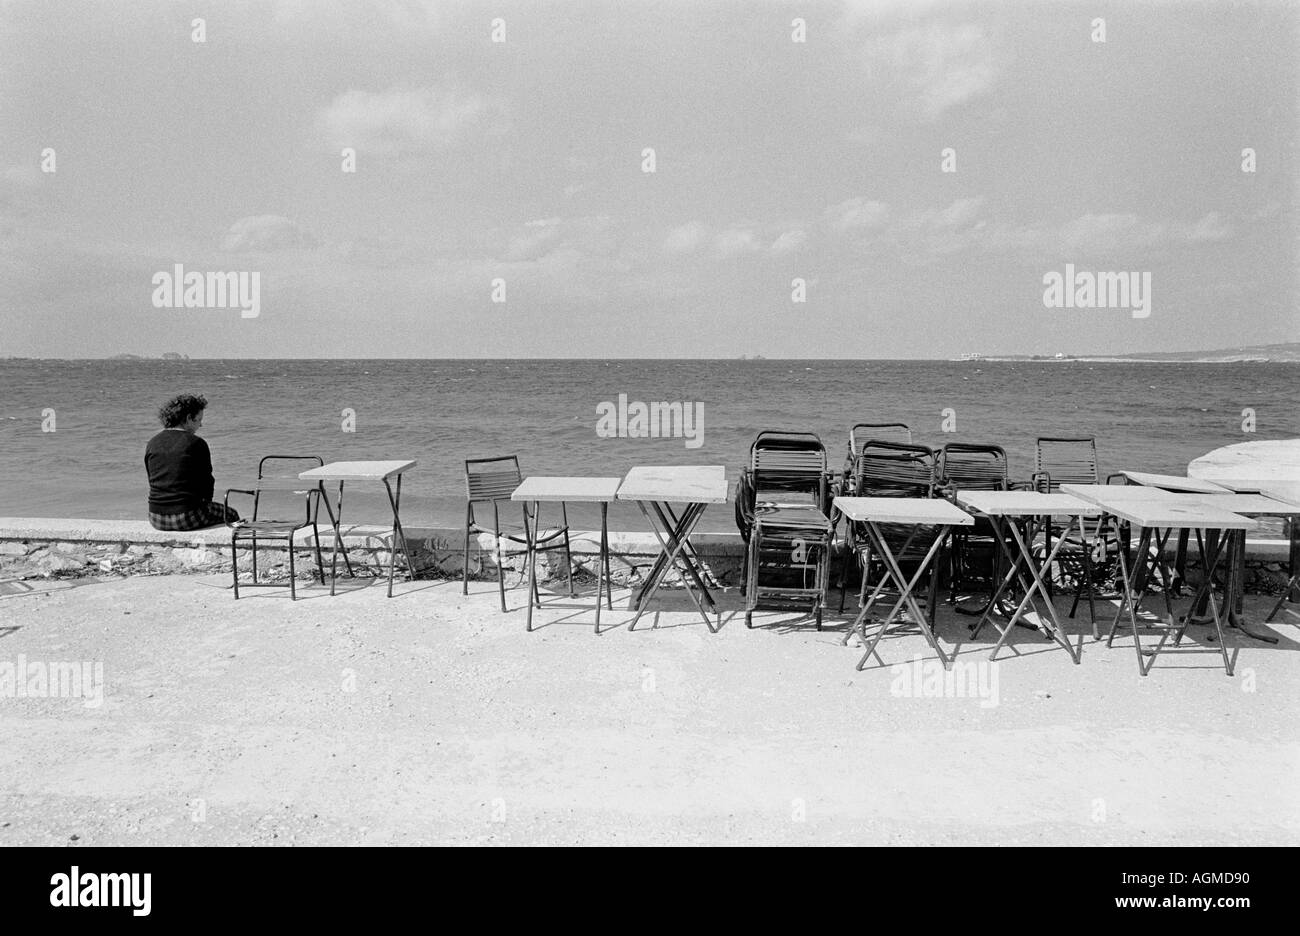 Greek woman sitting alone by a deserted taverna Paros Greece, 1983. Concept or conceptual image. Stock Photo